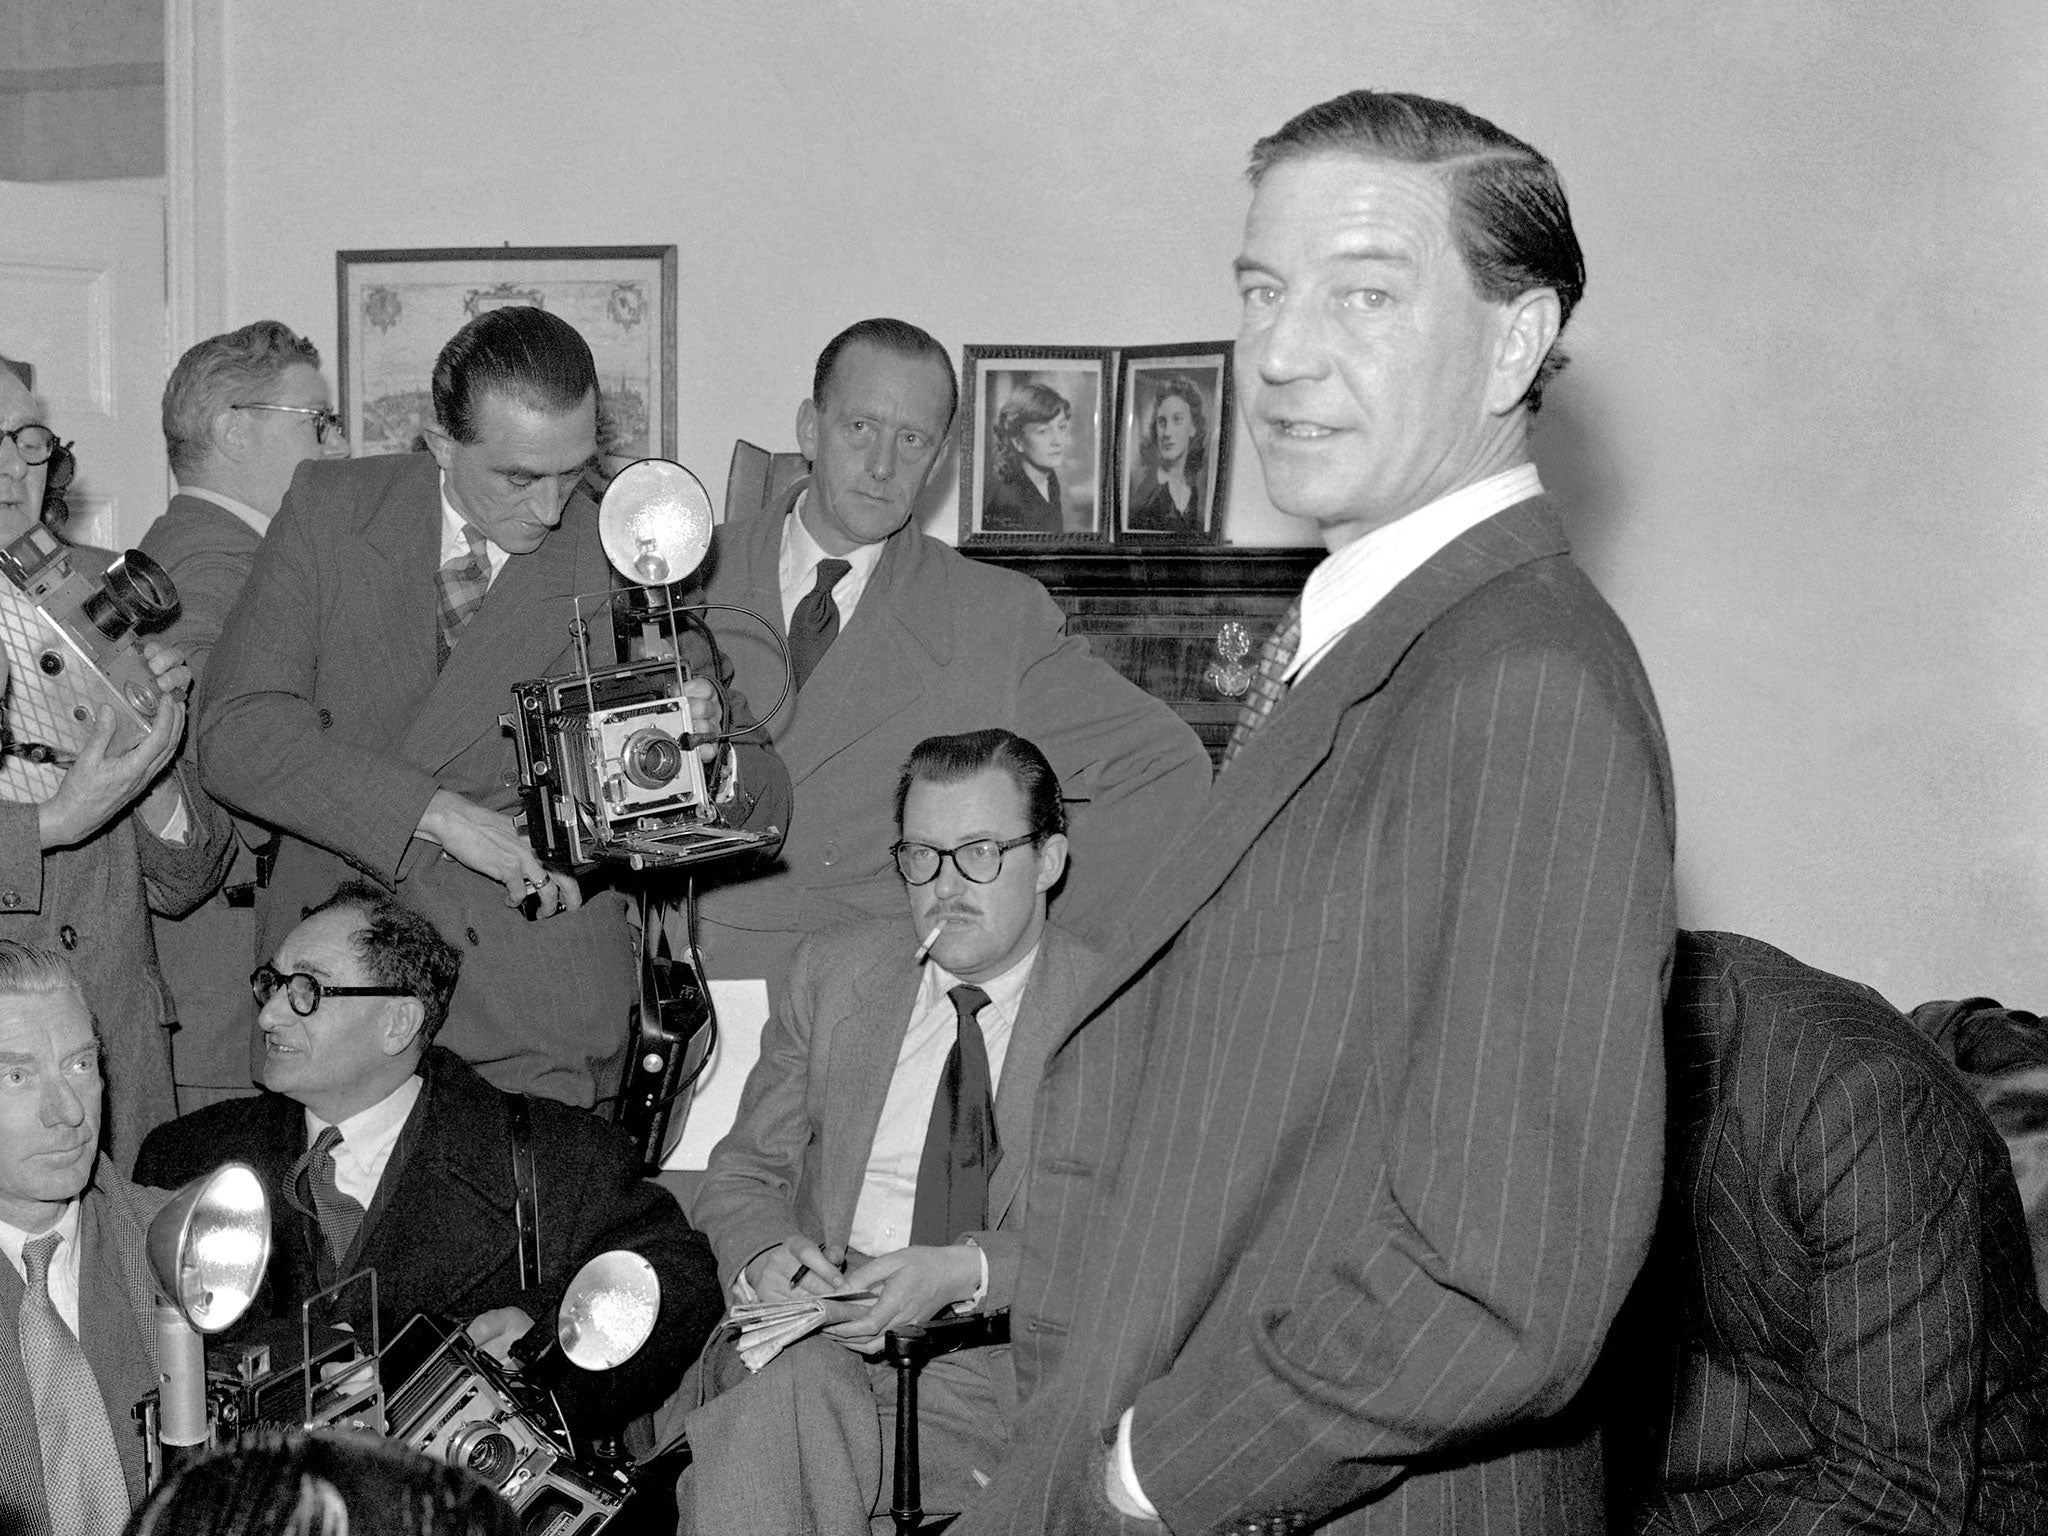 Philby, despite helping two fellow KGB spies flee Britain for Moscow in 1951, protested his innocence and stayed in Britain until 1963